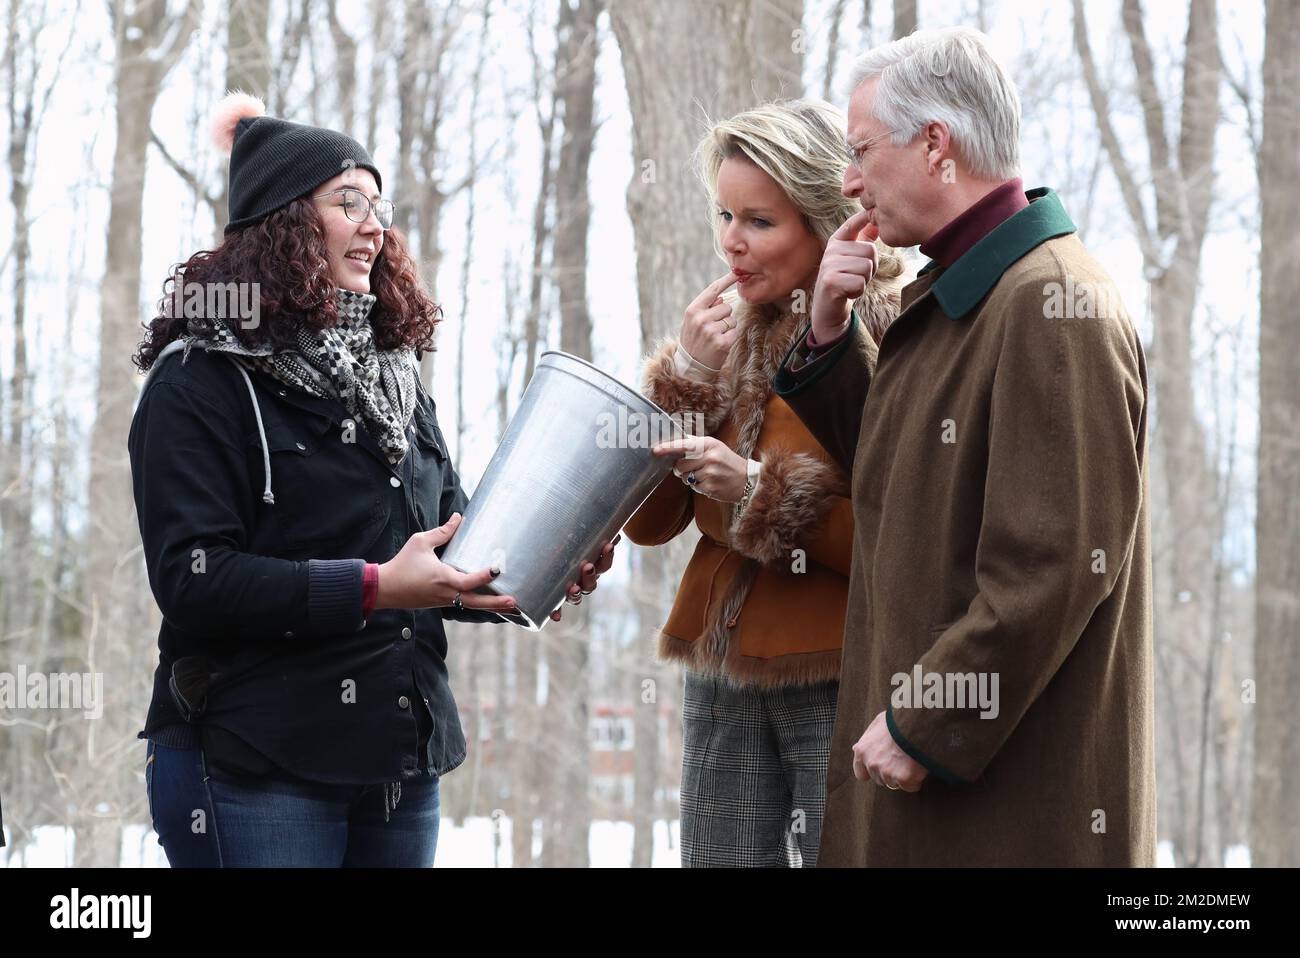 Queen Mathilde of Belgium, Canada Governor General Julie Payette and King Philippe - Filip of Belgium a visit to a sugar shack on the first day of a state visit of the Belgian Royals to Canada in Ottawa, Canada, Monday 12 March 2018. BELGA PHOTO BENOIT DOPPAGNE  Stock Photo